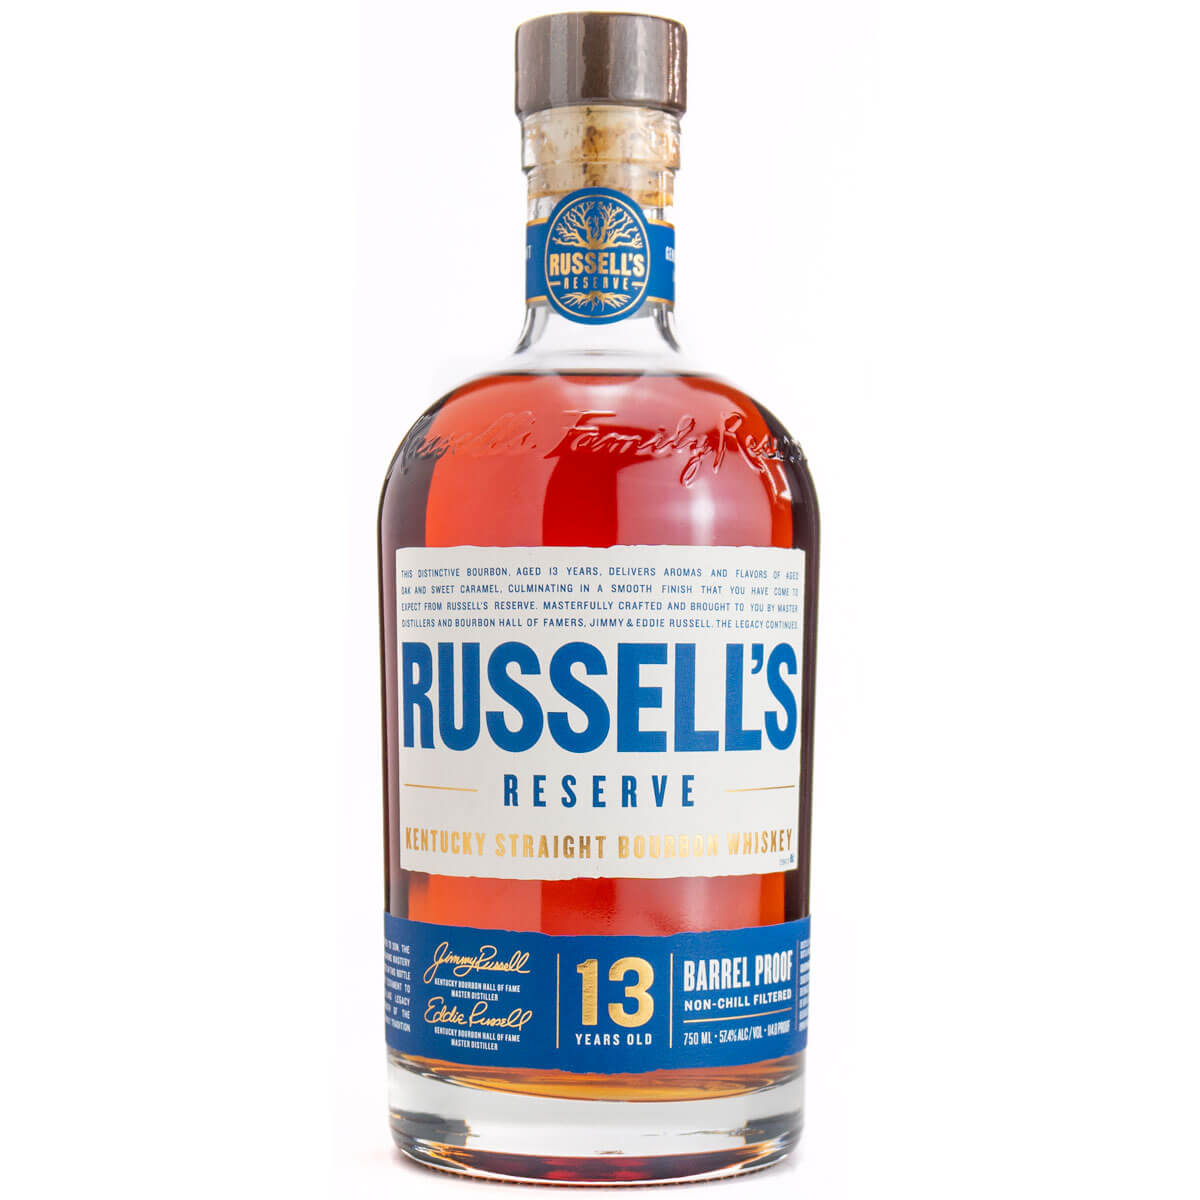 Russell's Reserve 13-Year-Old Bourbon bottle